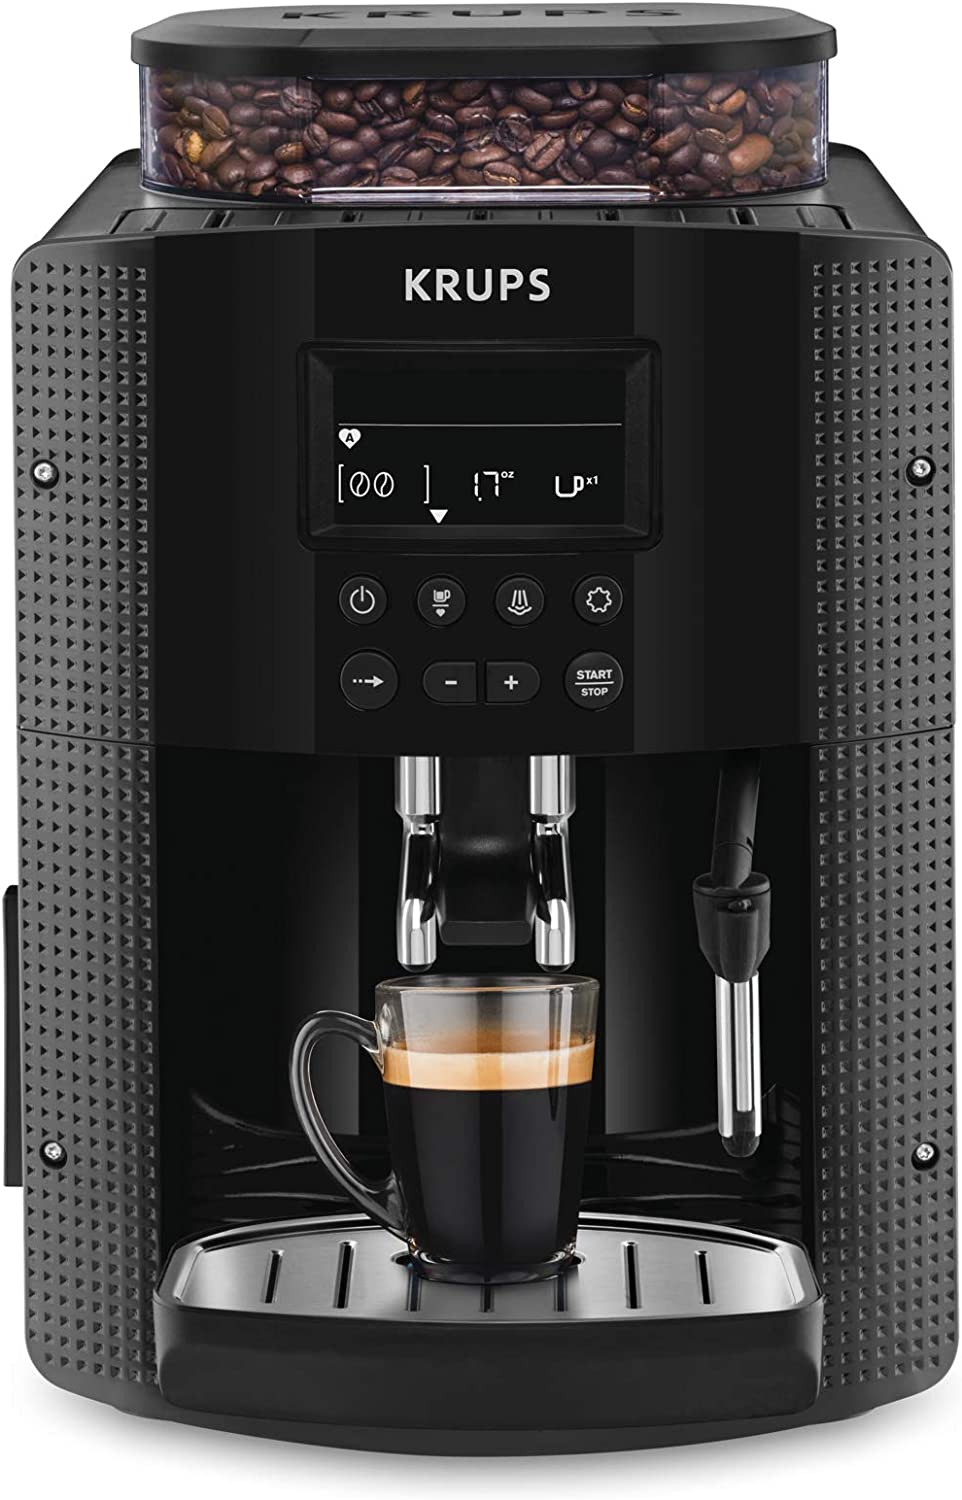 Krups Espresso Machine YY8135FD Full Auto Compact with Display Black